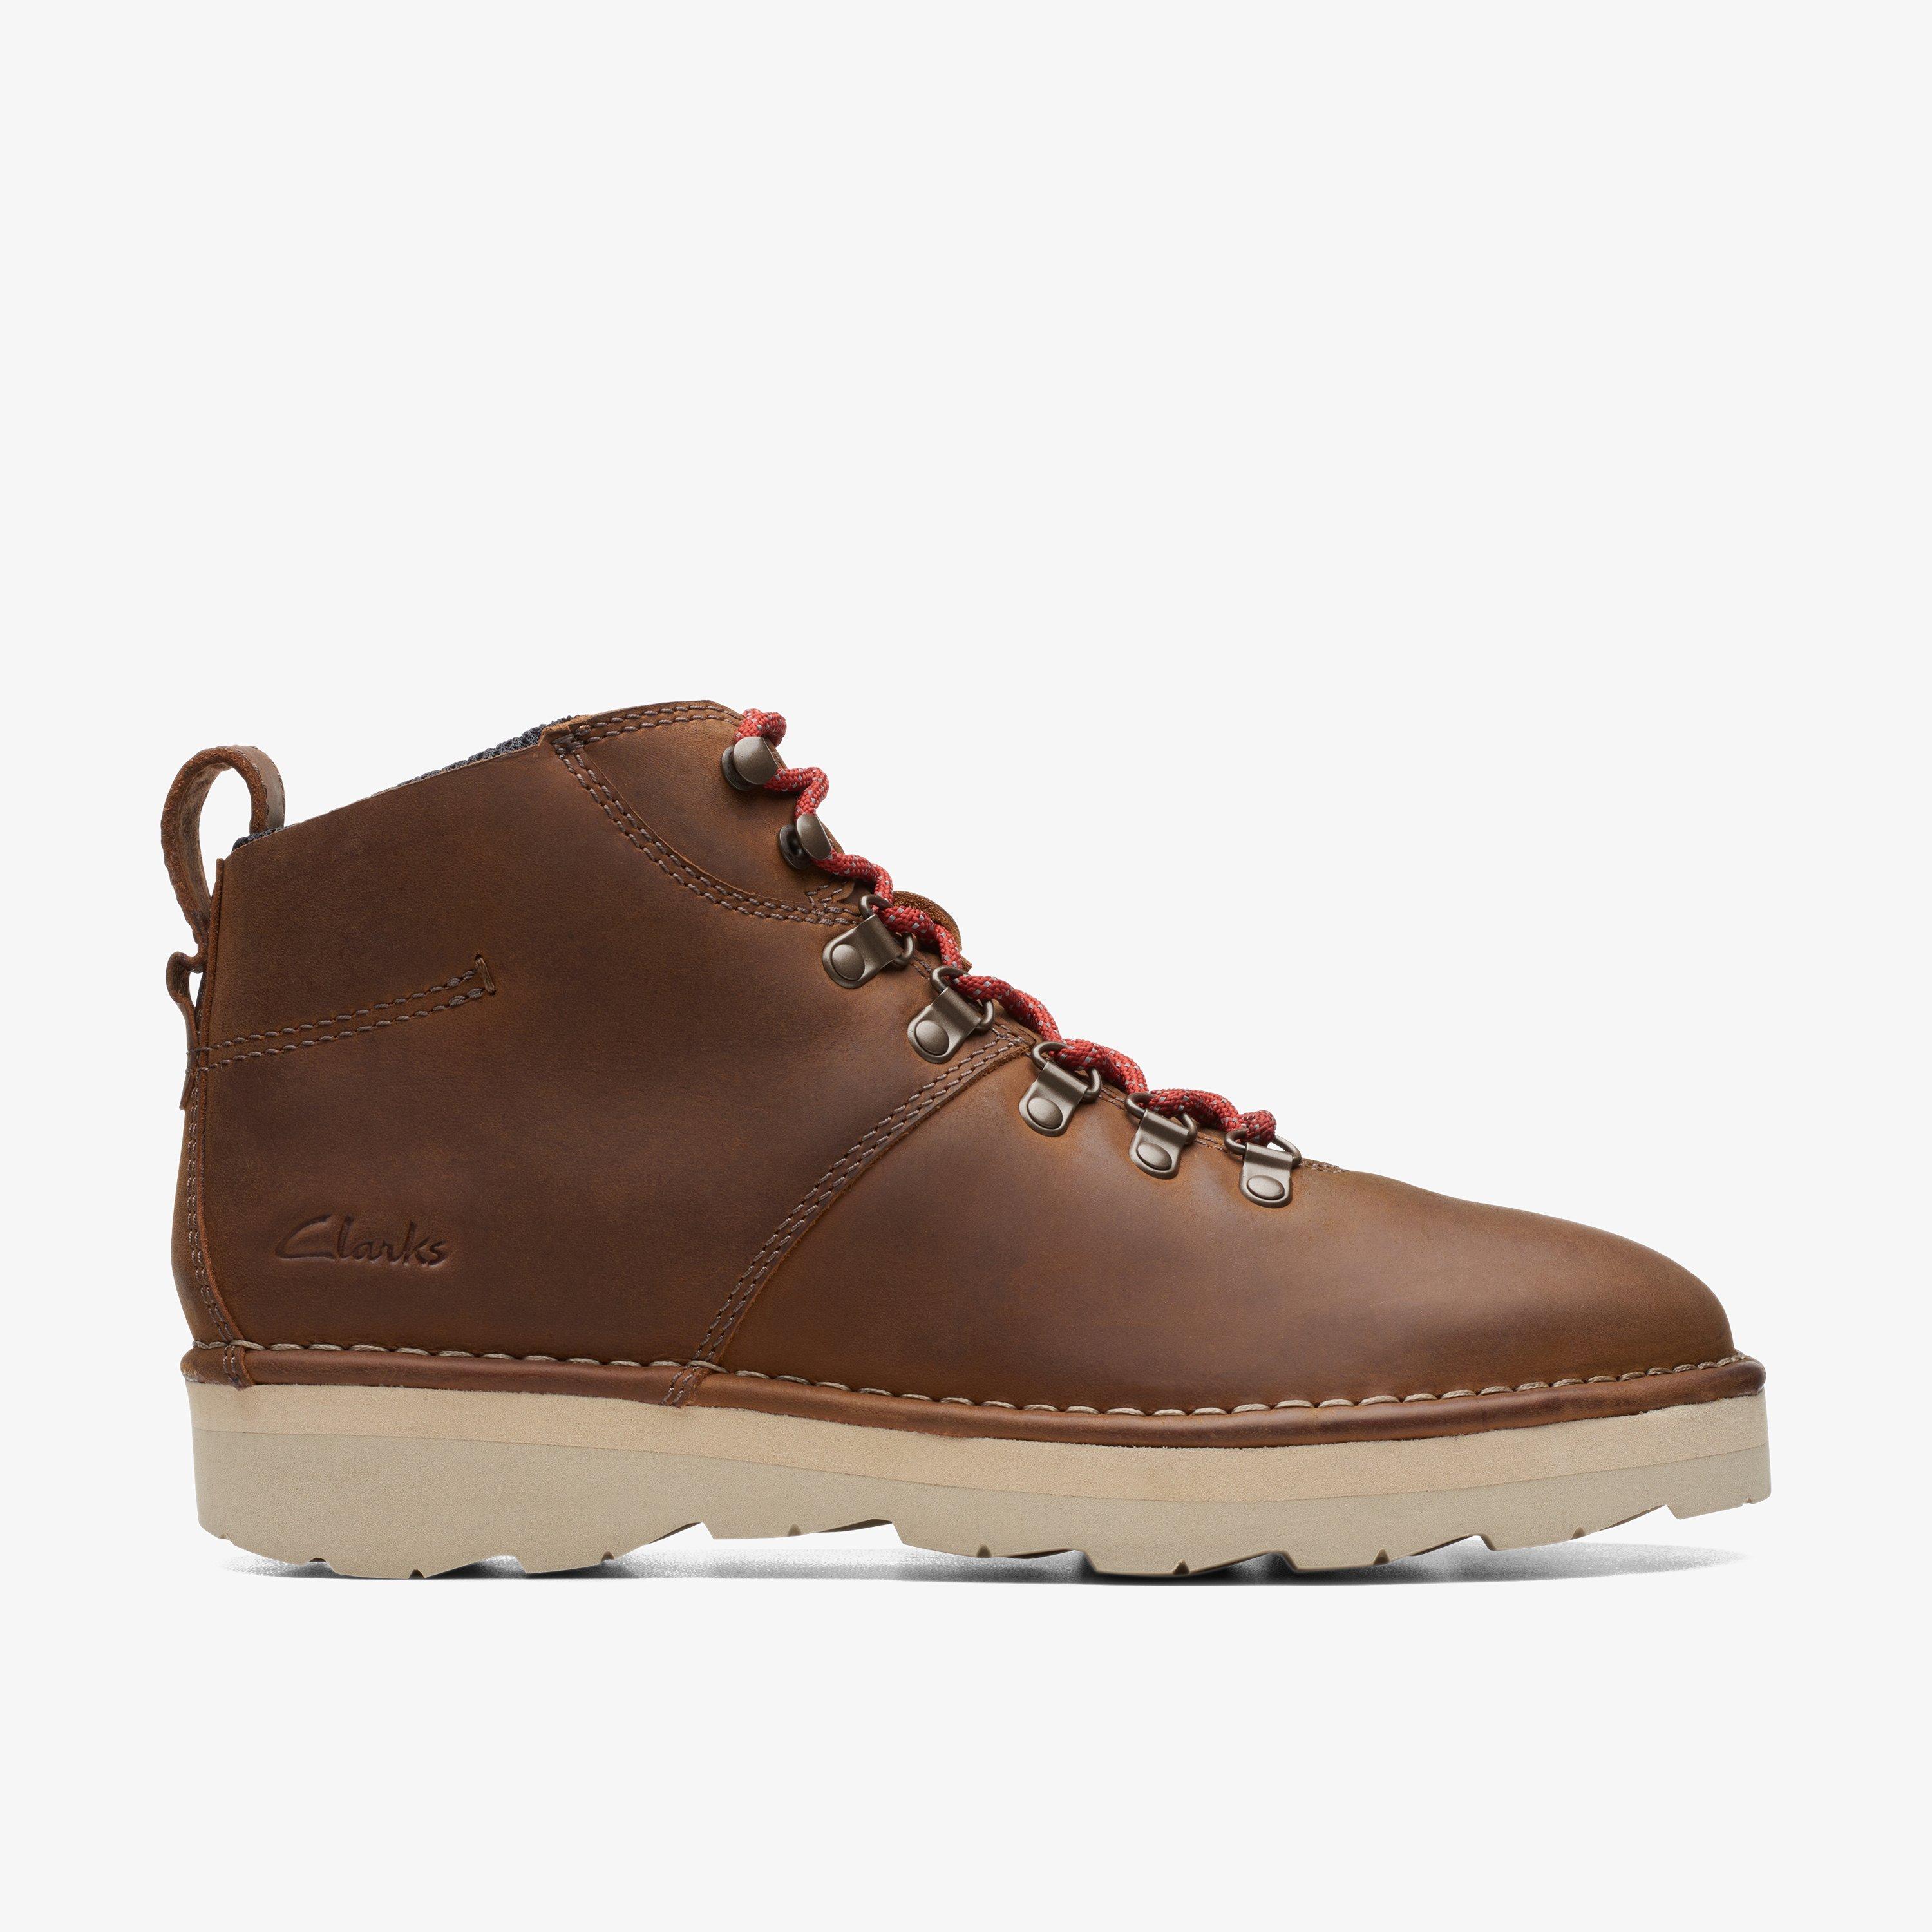 MENS Craftdale Hike Tan Leather Ankle Boots | Clarks Outlet